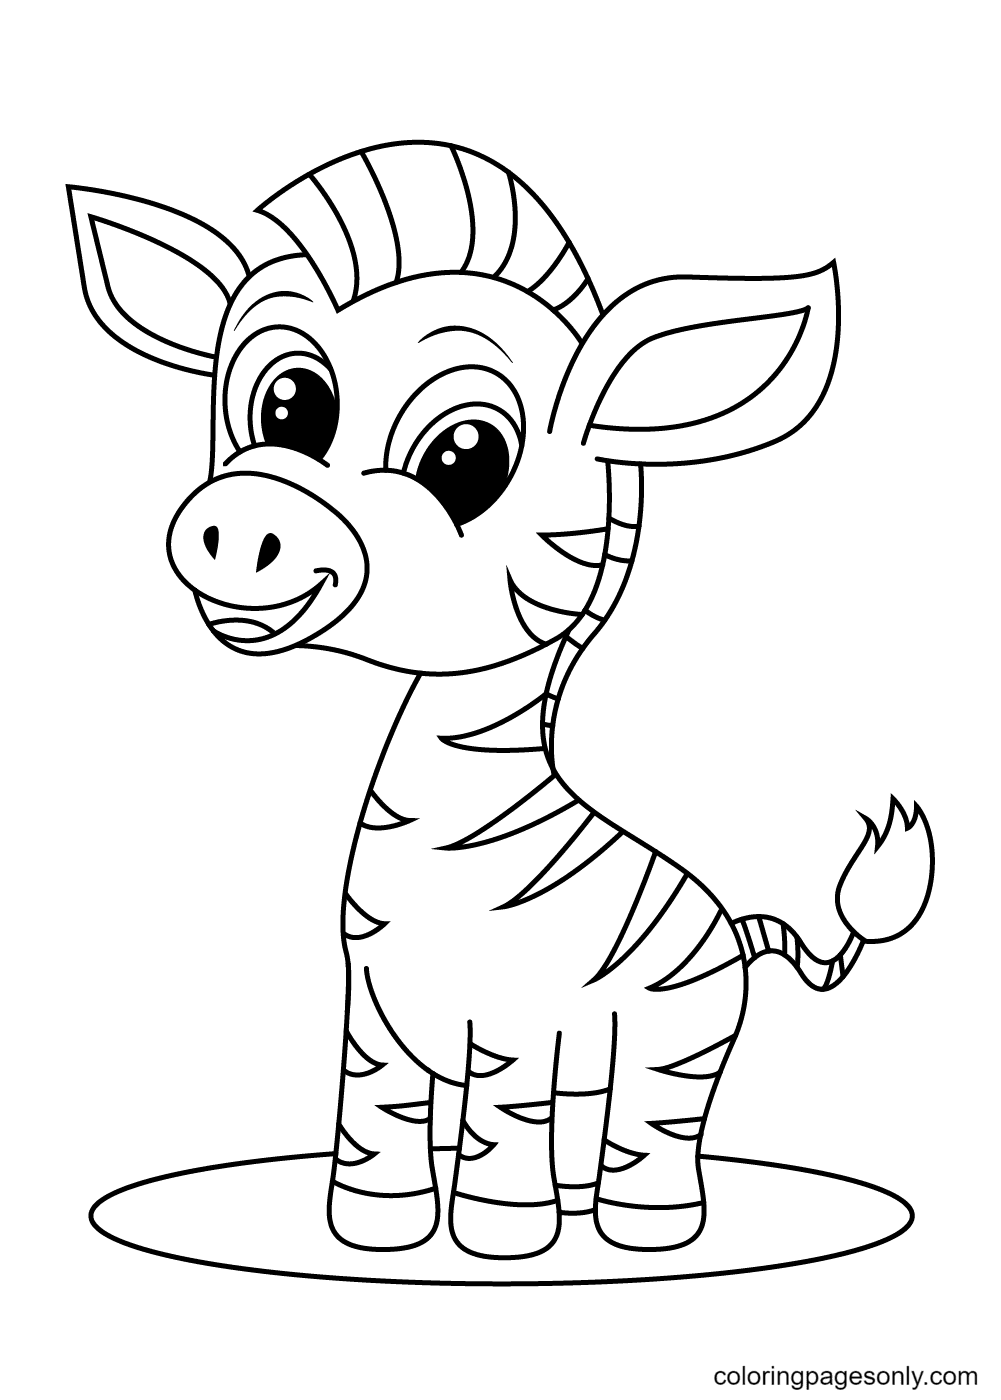 A Zebra with cute little and short legs Coloring Pages